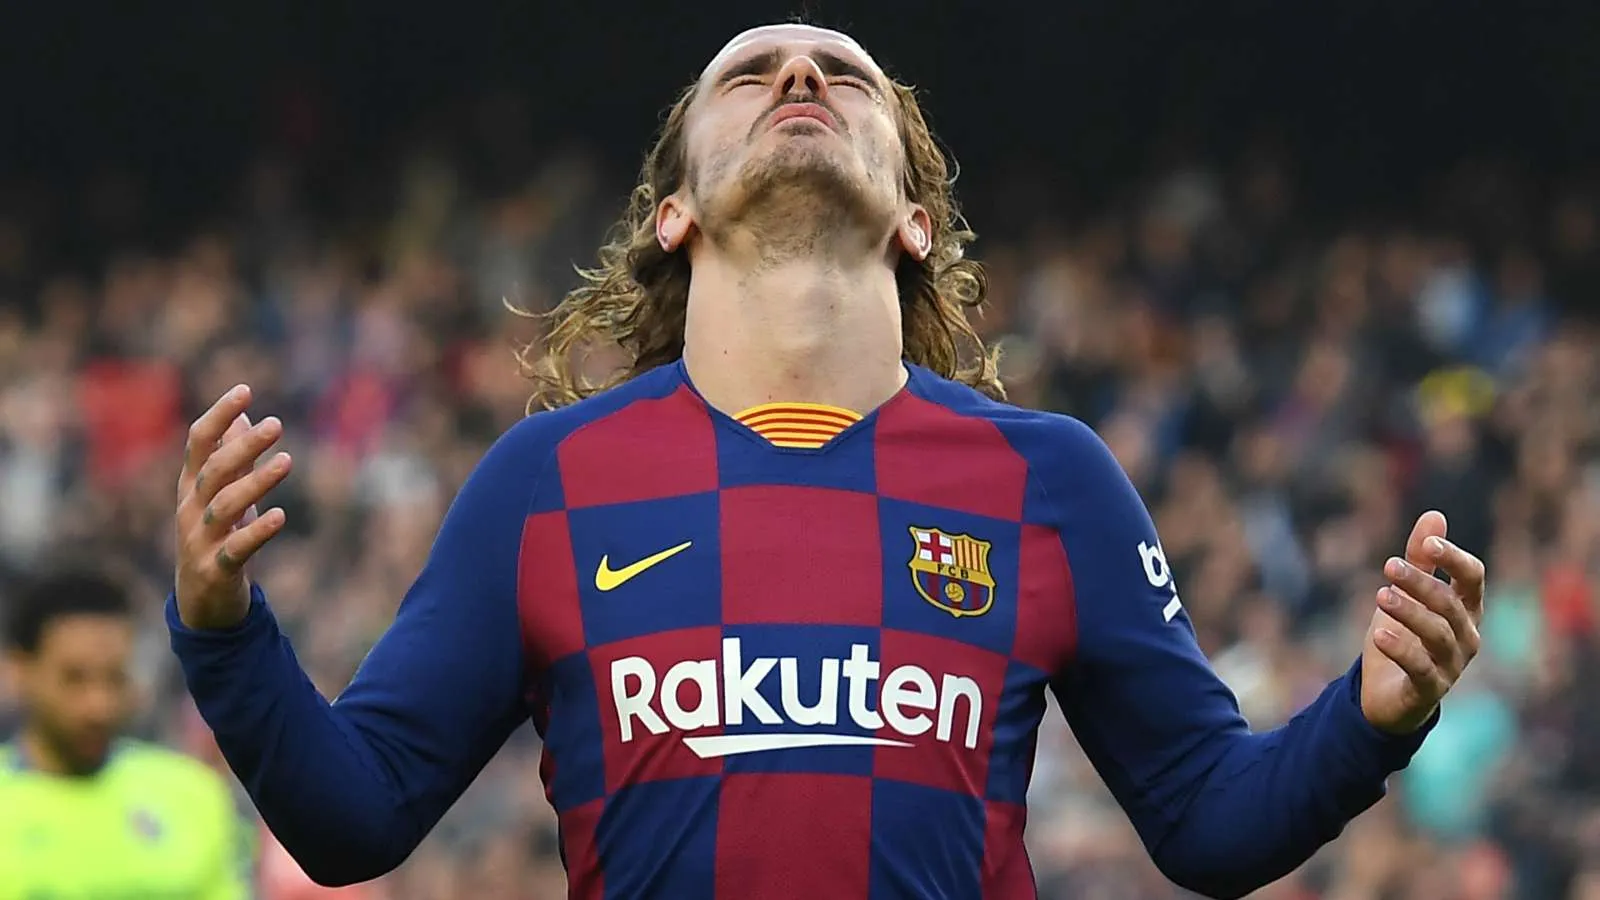 'Griezmann doesn't look happy' - Scout who discovered Barcelona forward suggests 'problems' at Camp Nou - Bóng Đá